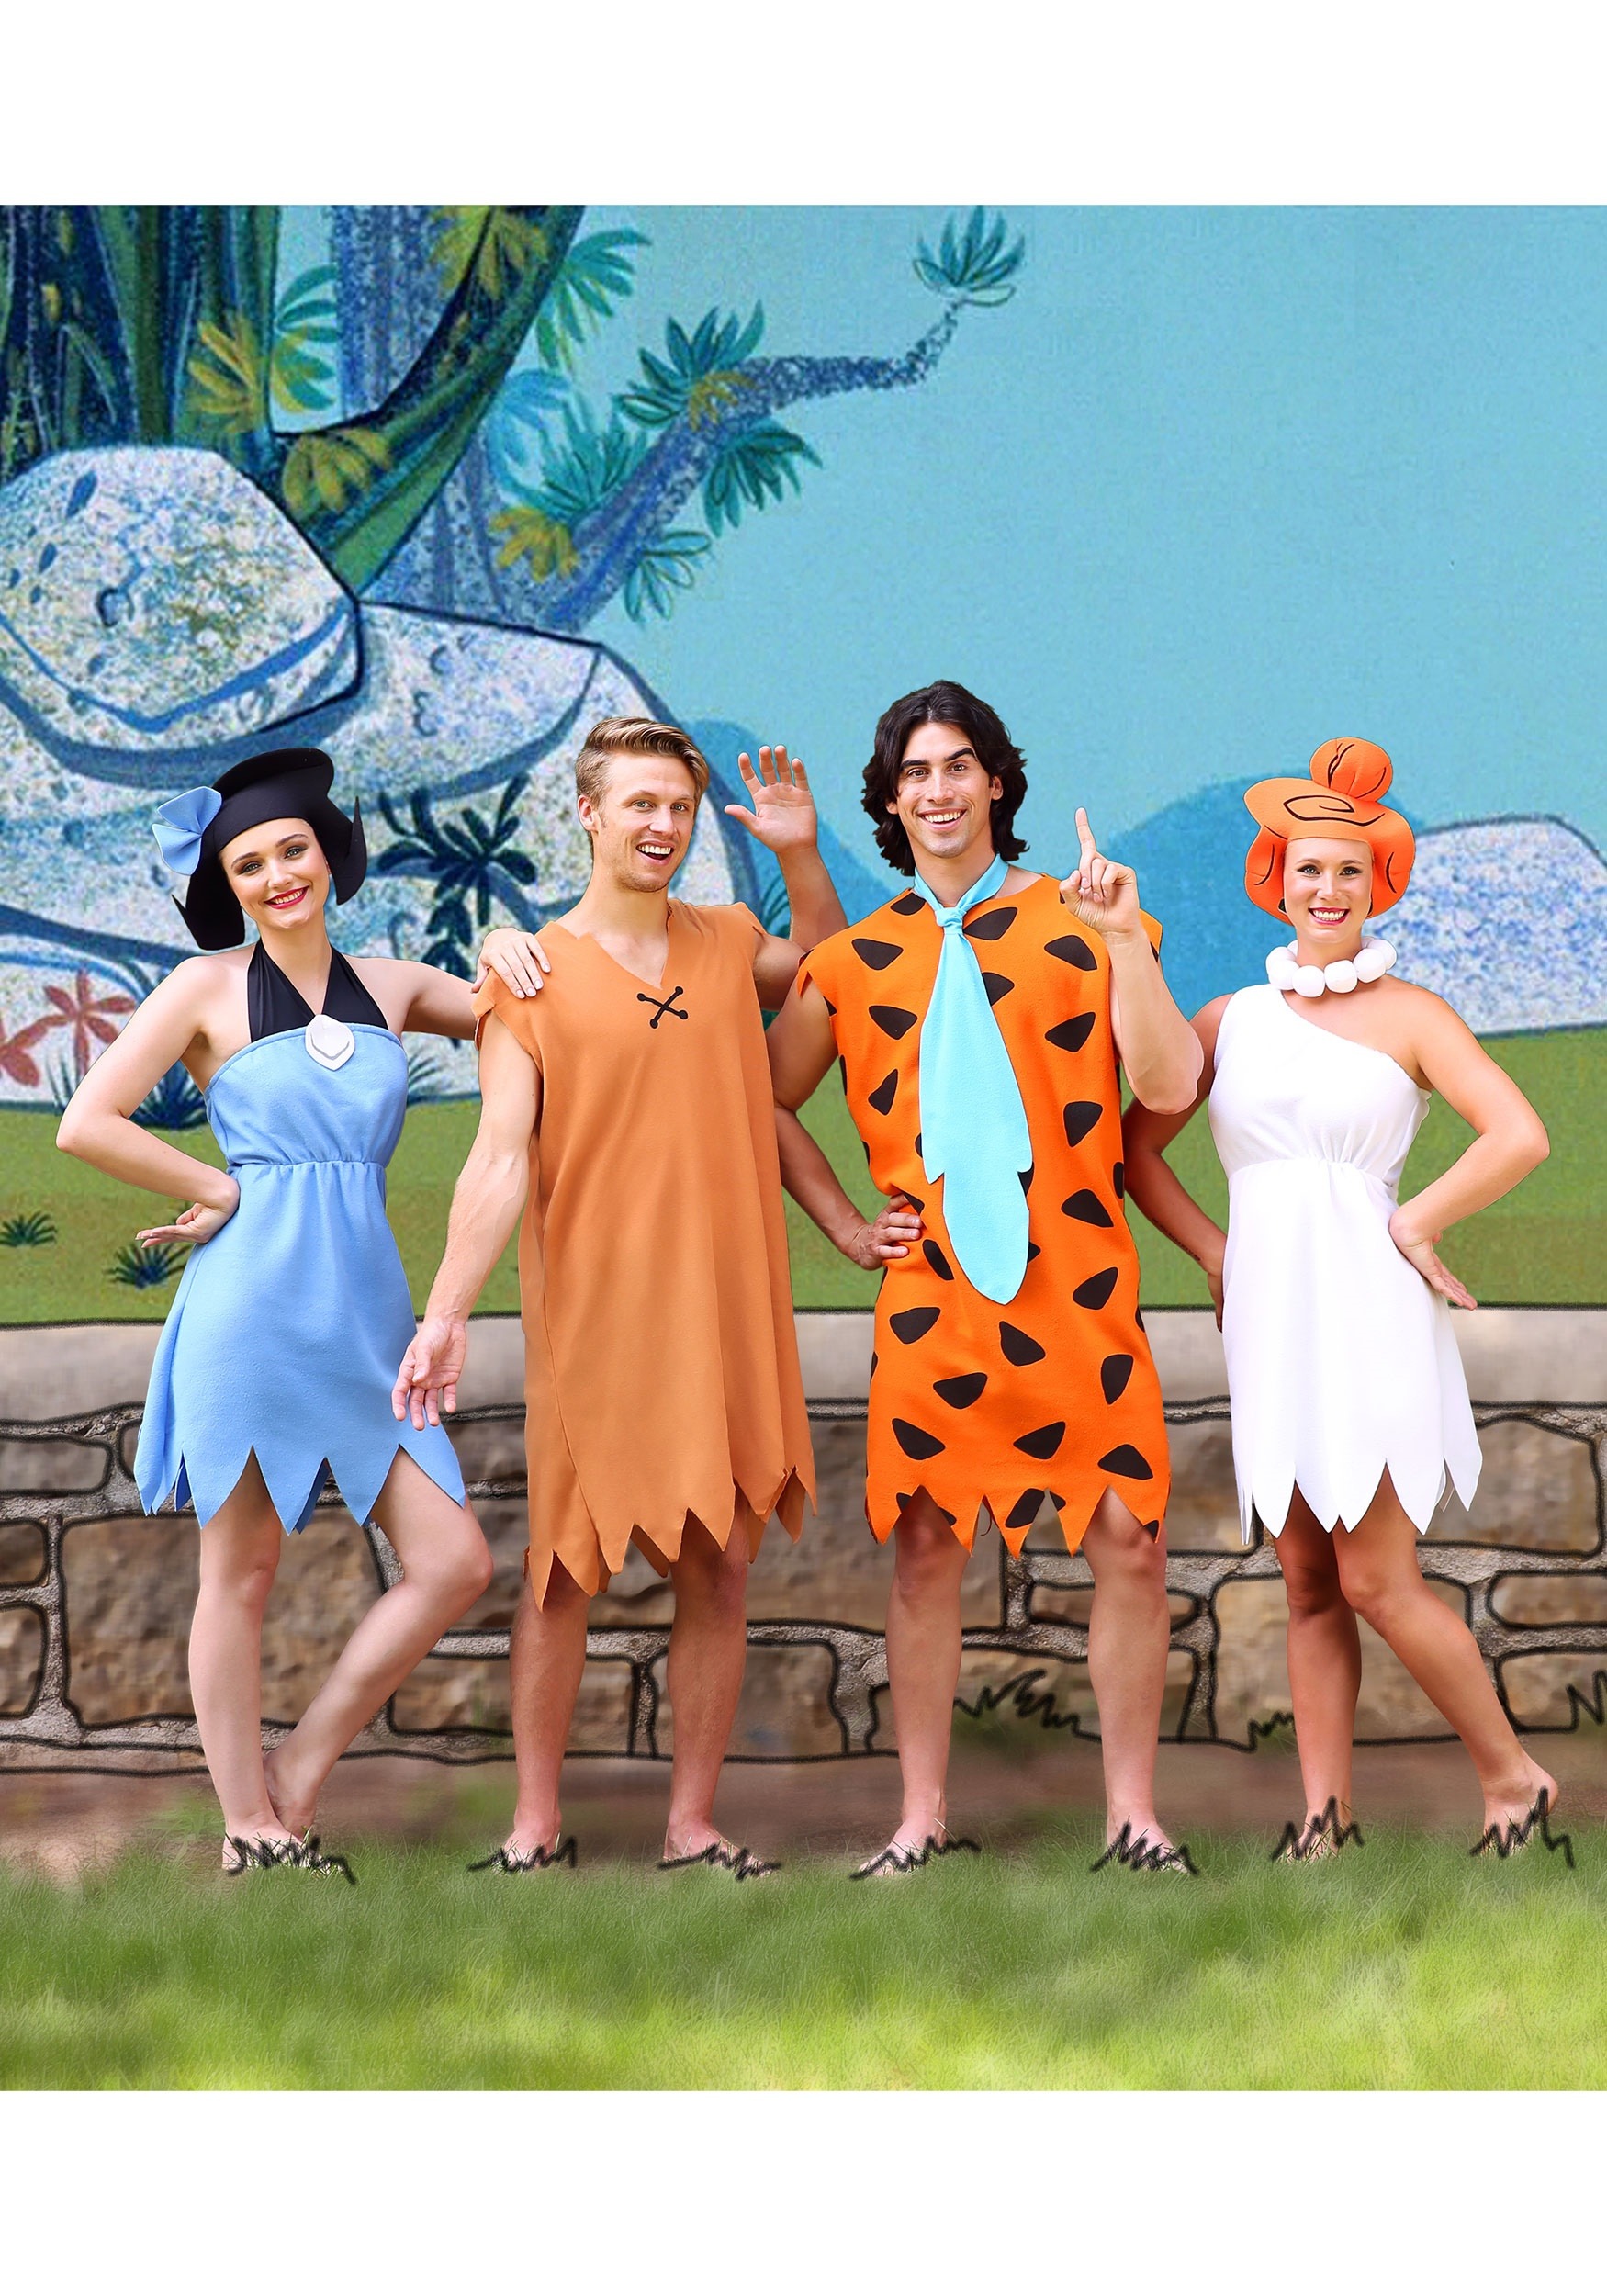 Barney Rubble Costume For Adults , Adult The Flintstones Costumes